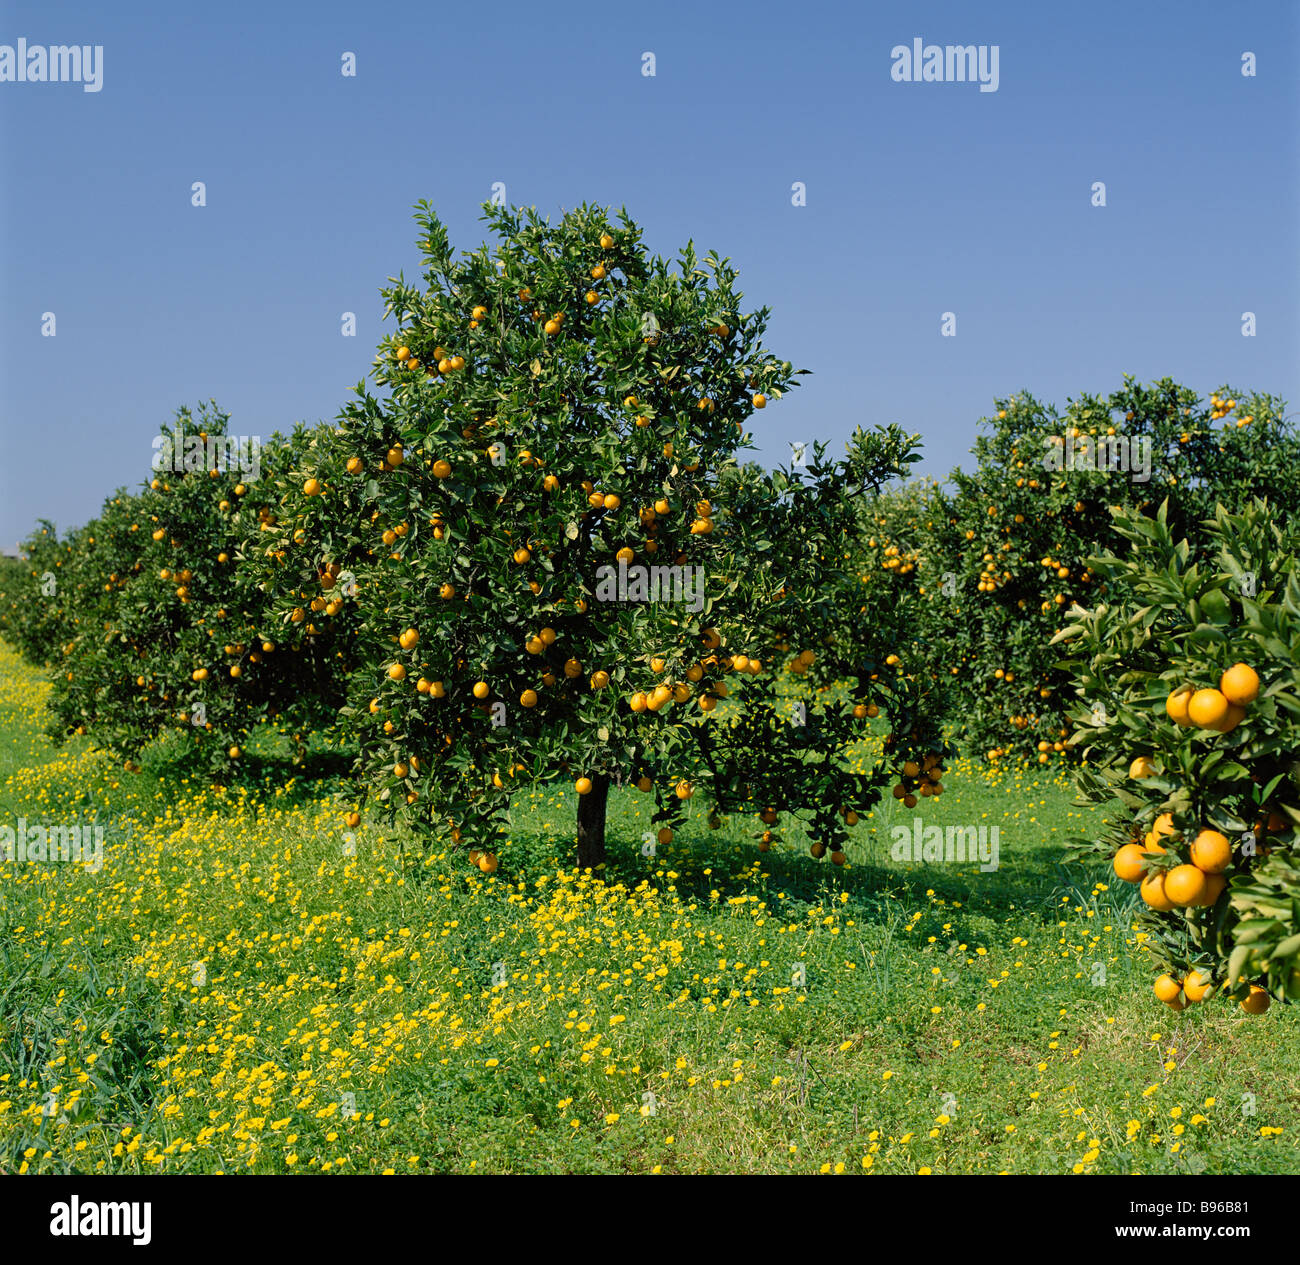 Portugal, the Algarve, orange trees in an orchard Stock Photo